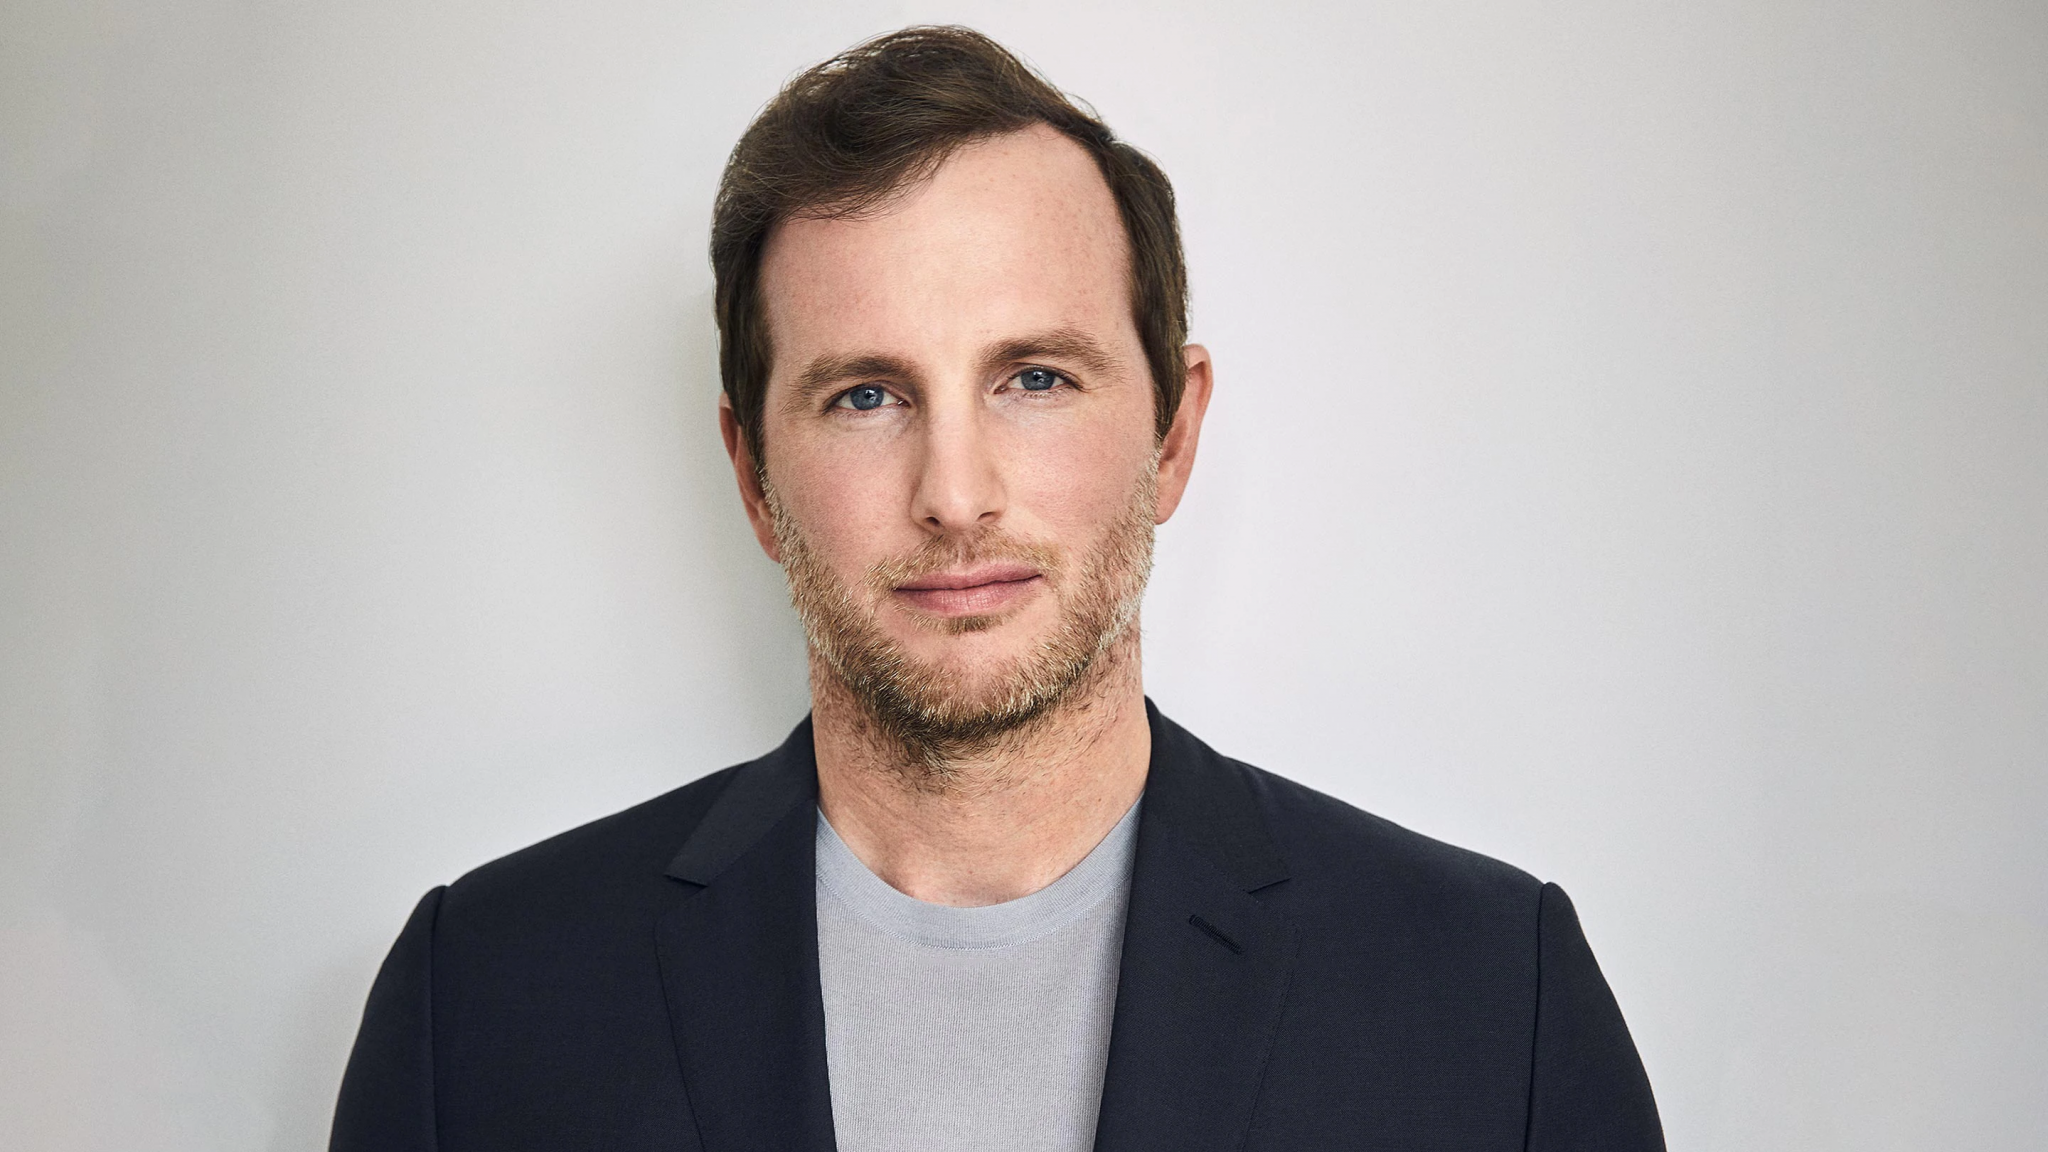 Joe Gebbia has joined the Board of the Olympic Refuge Foundation ©Airbnb